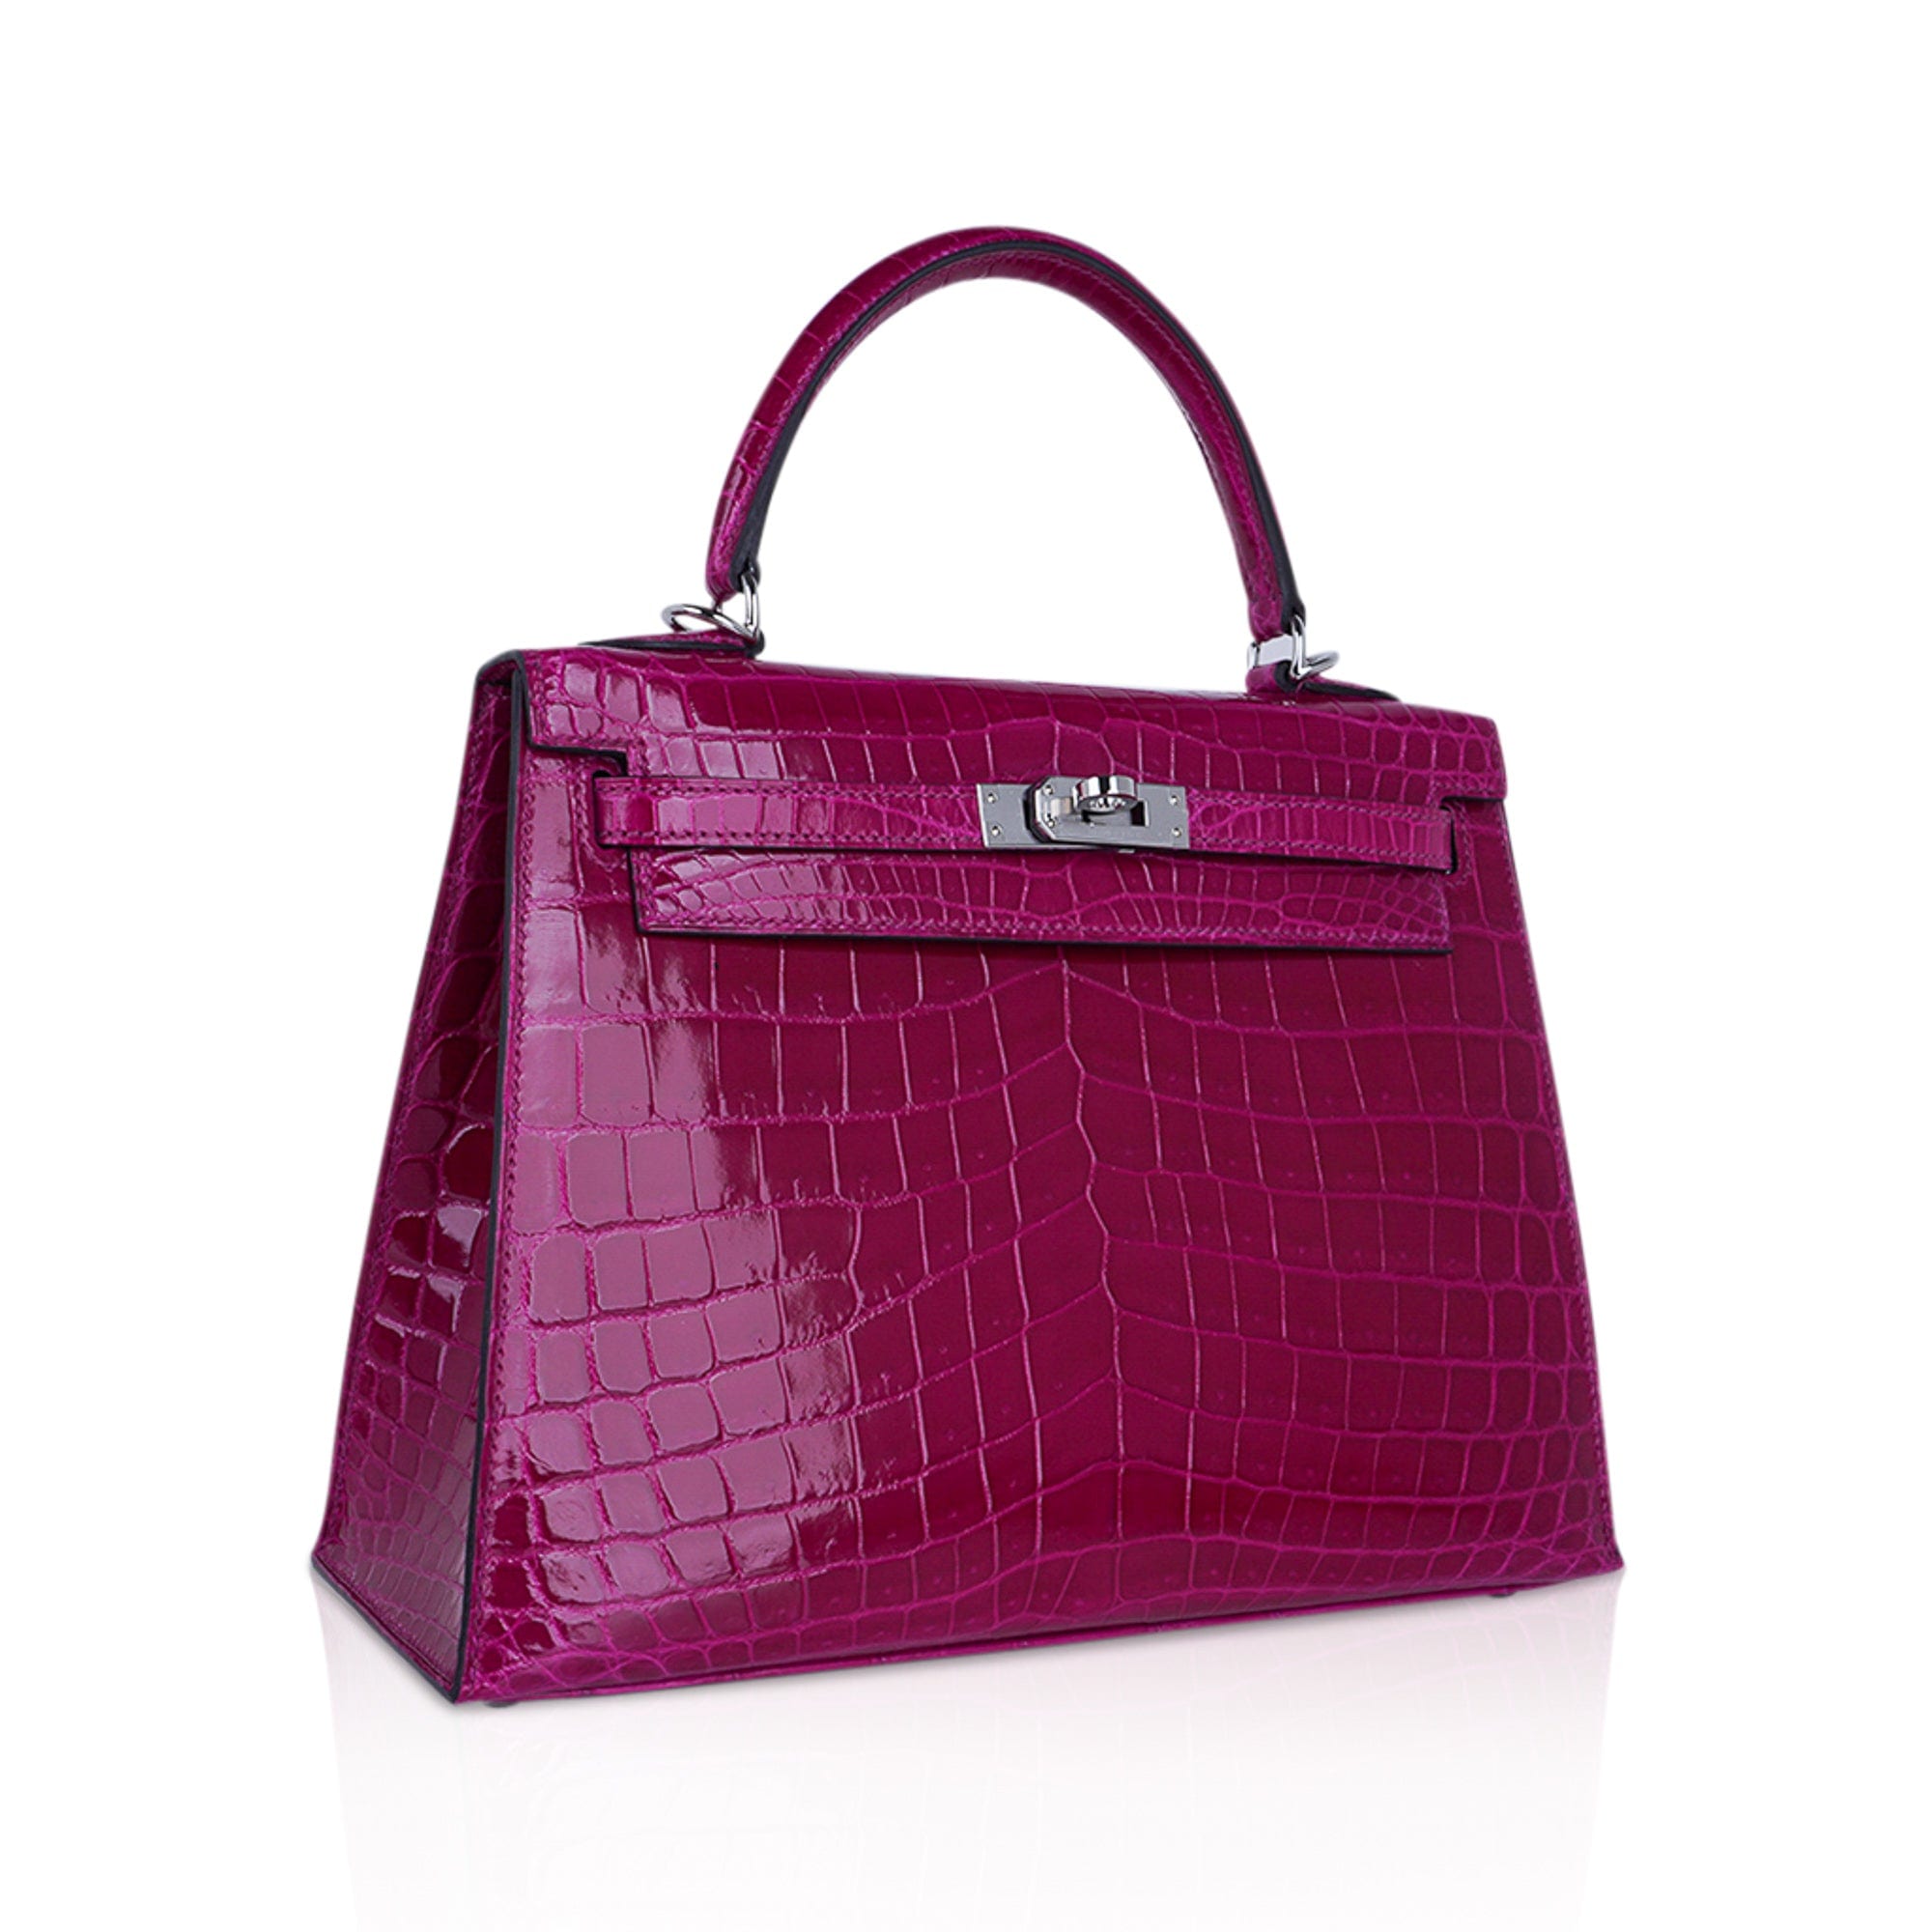 Hermes Kelly 25 Sellier Bag Rose Pourpre Crocodile with Palladium Hardware